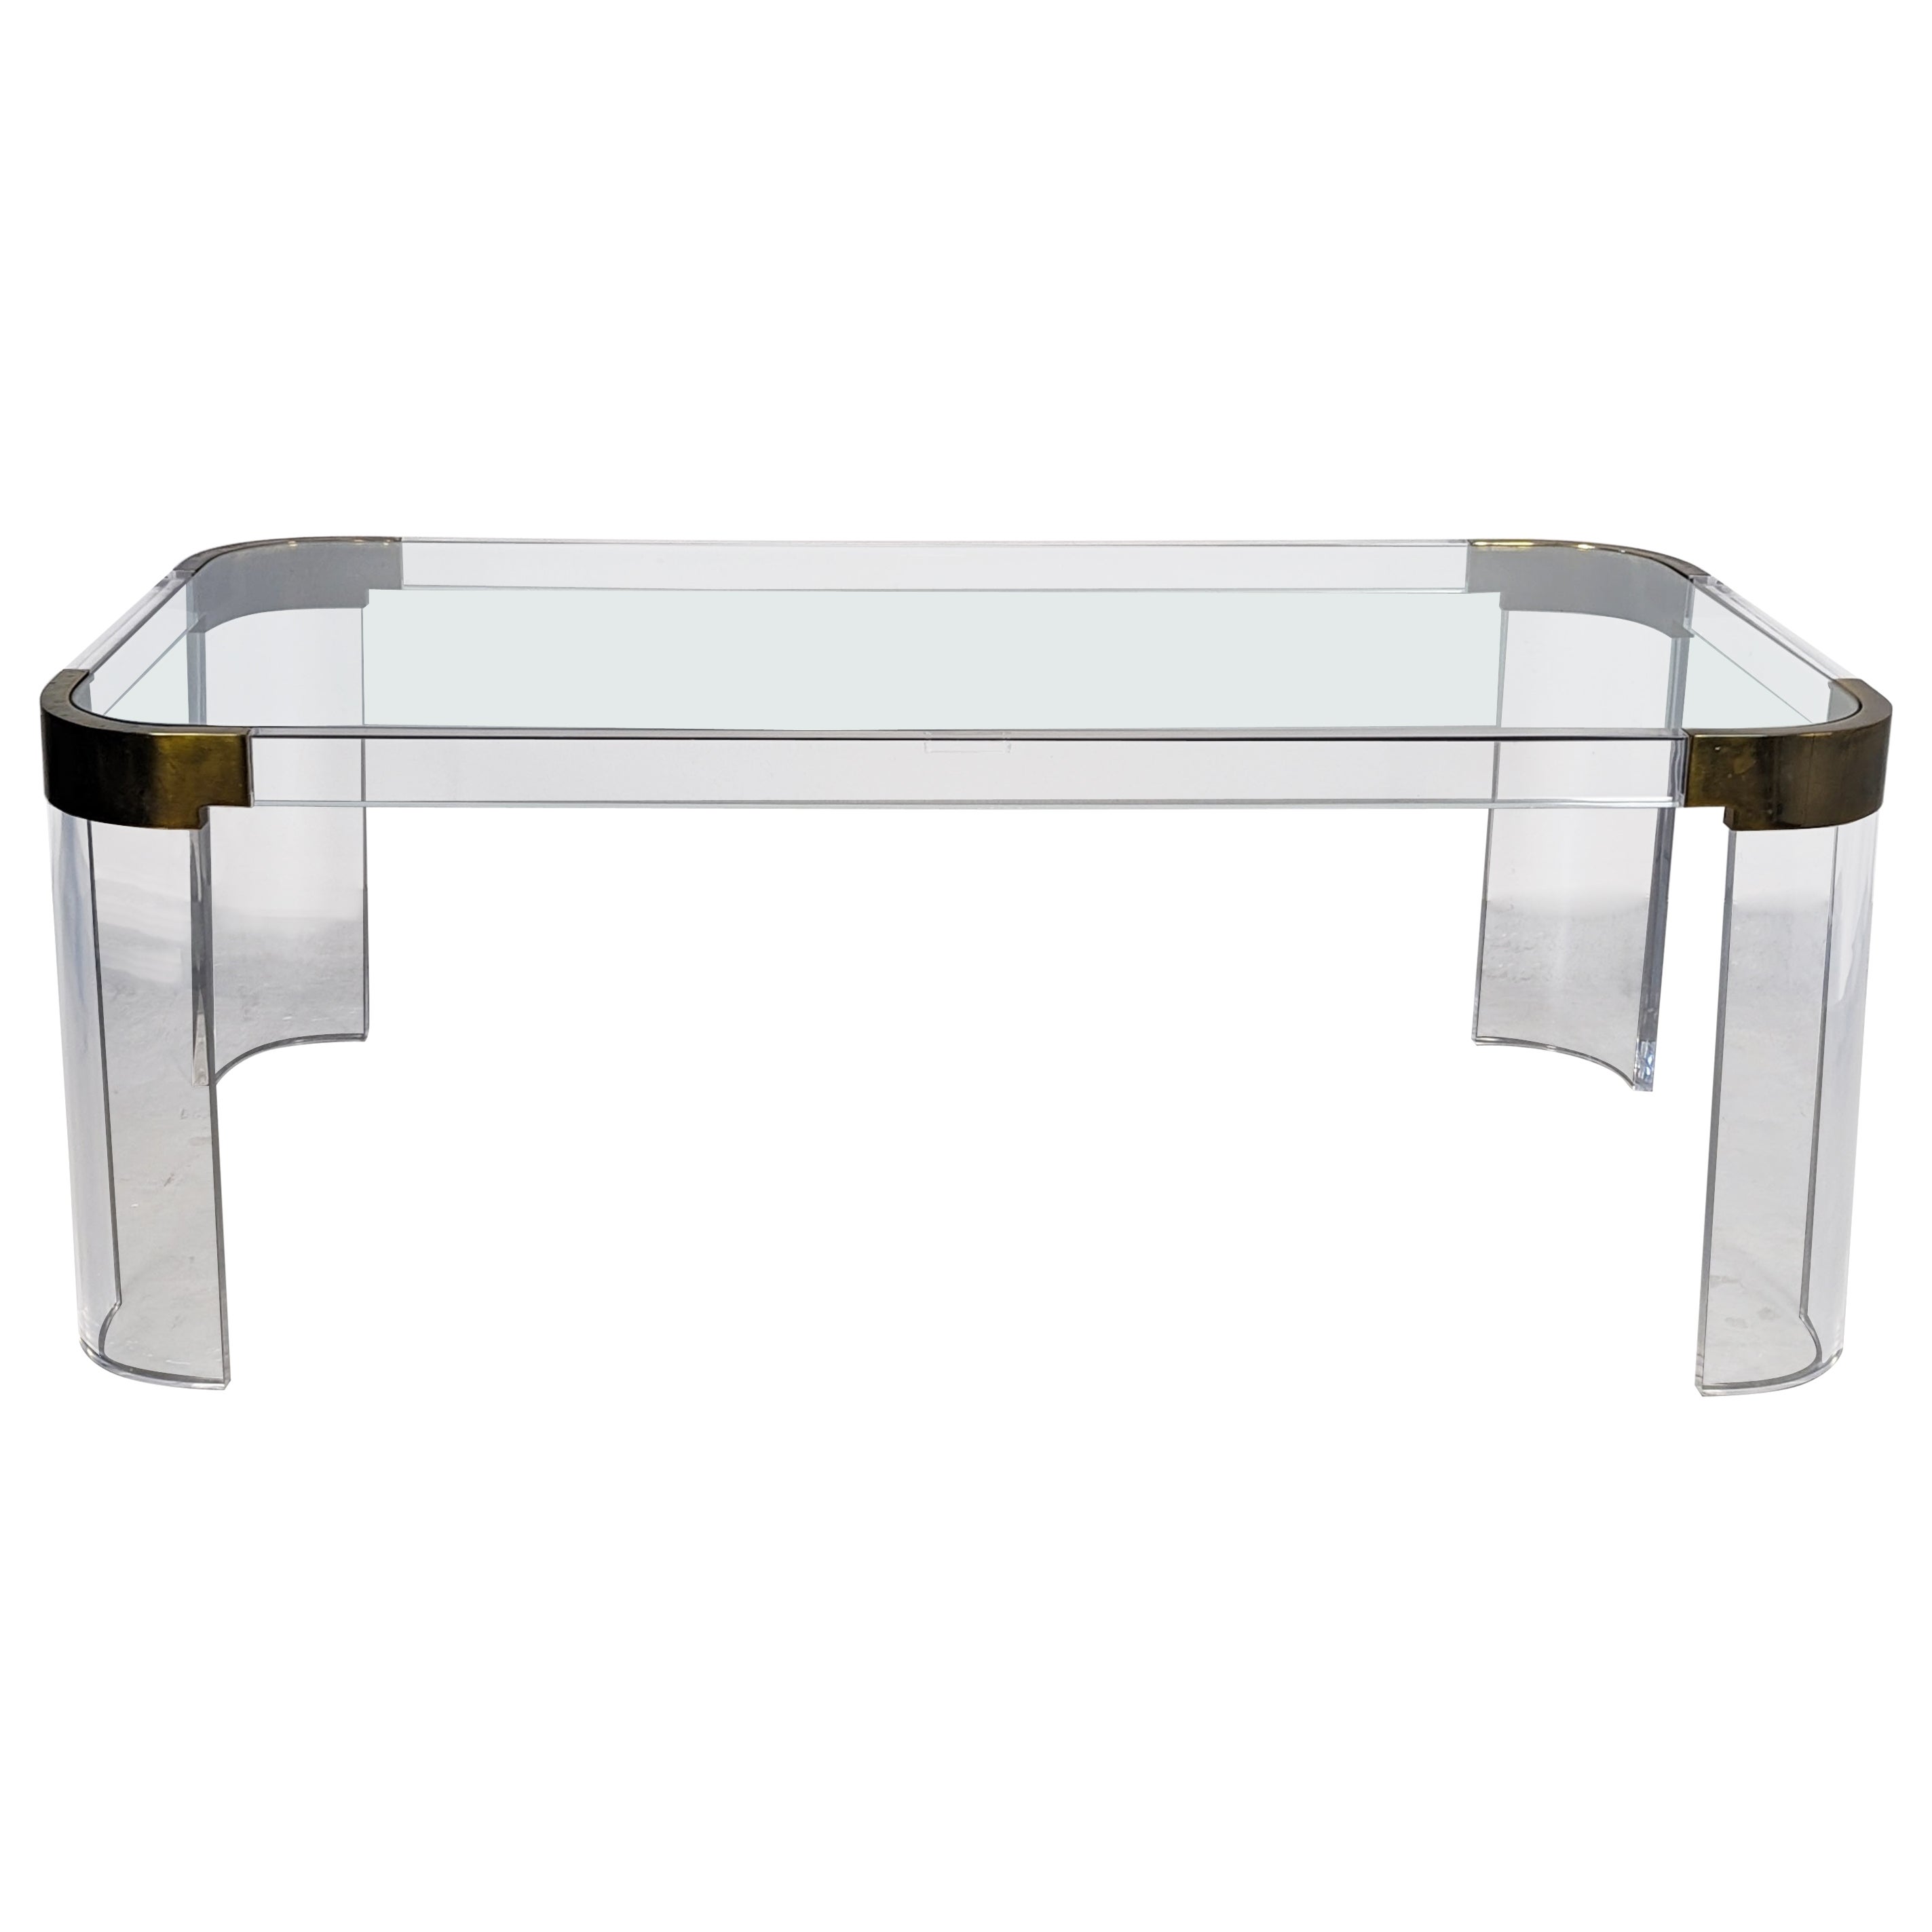 Lucite Dining Table by Charles Hollis Jones from the "Waterfall" Line, c1970s For Sale